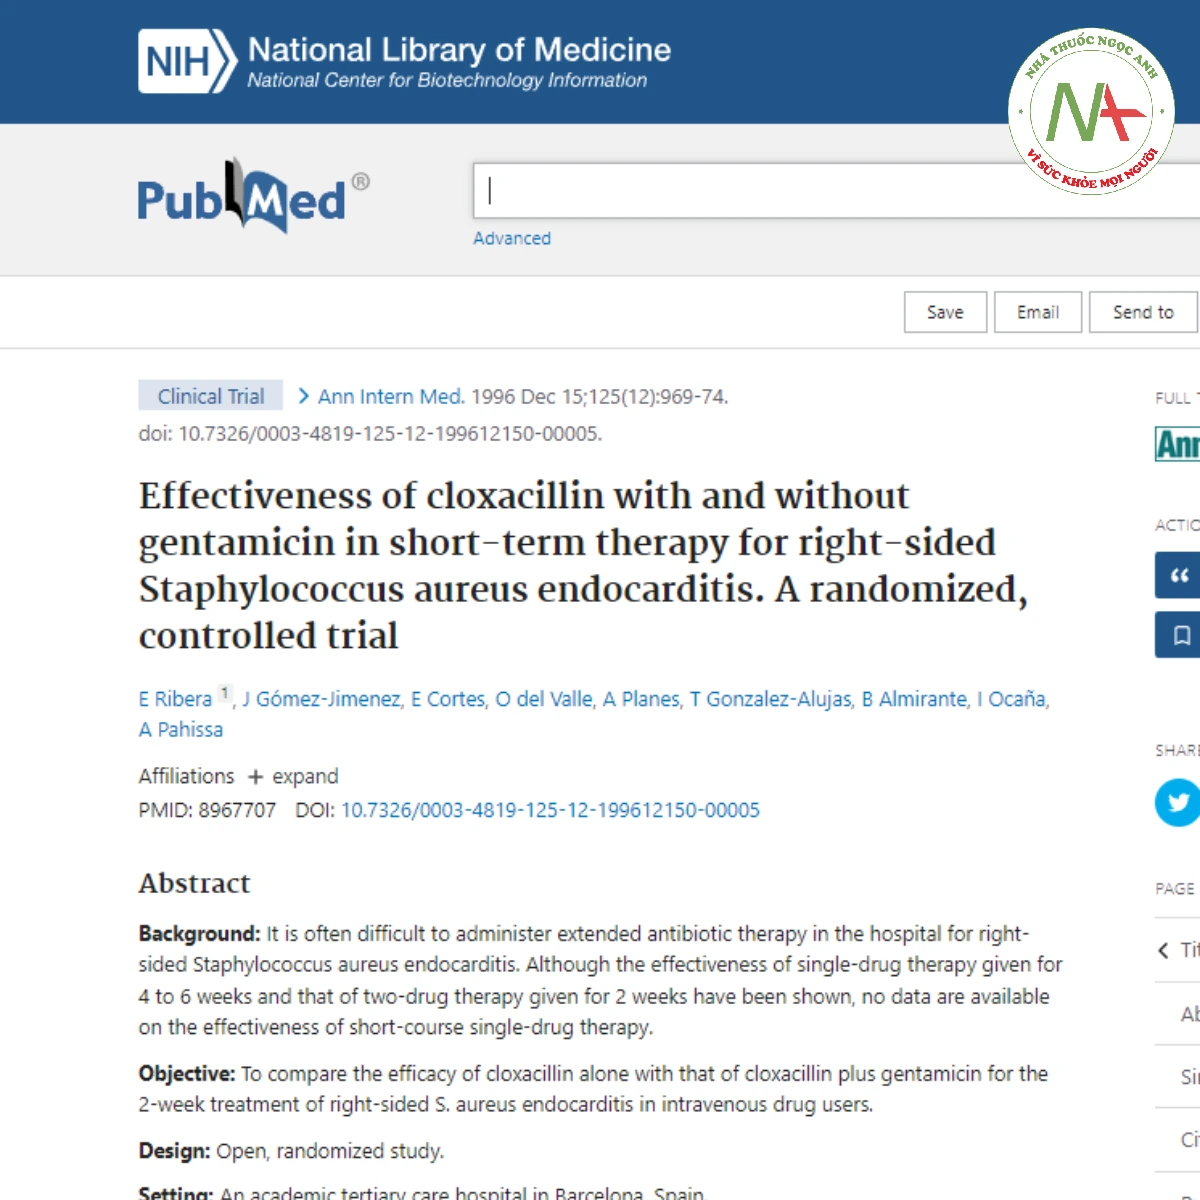 Effectiveness of cloxacillin with and without gentamicin in short-term therapy for right-sided Staphylococcus aureus endocarditis. A randomized, controlled trial